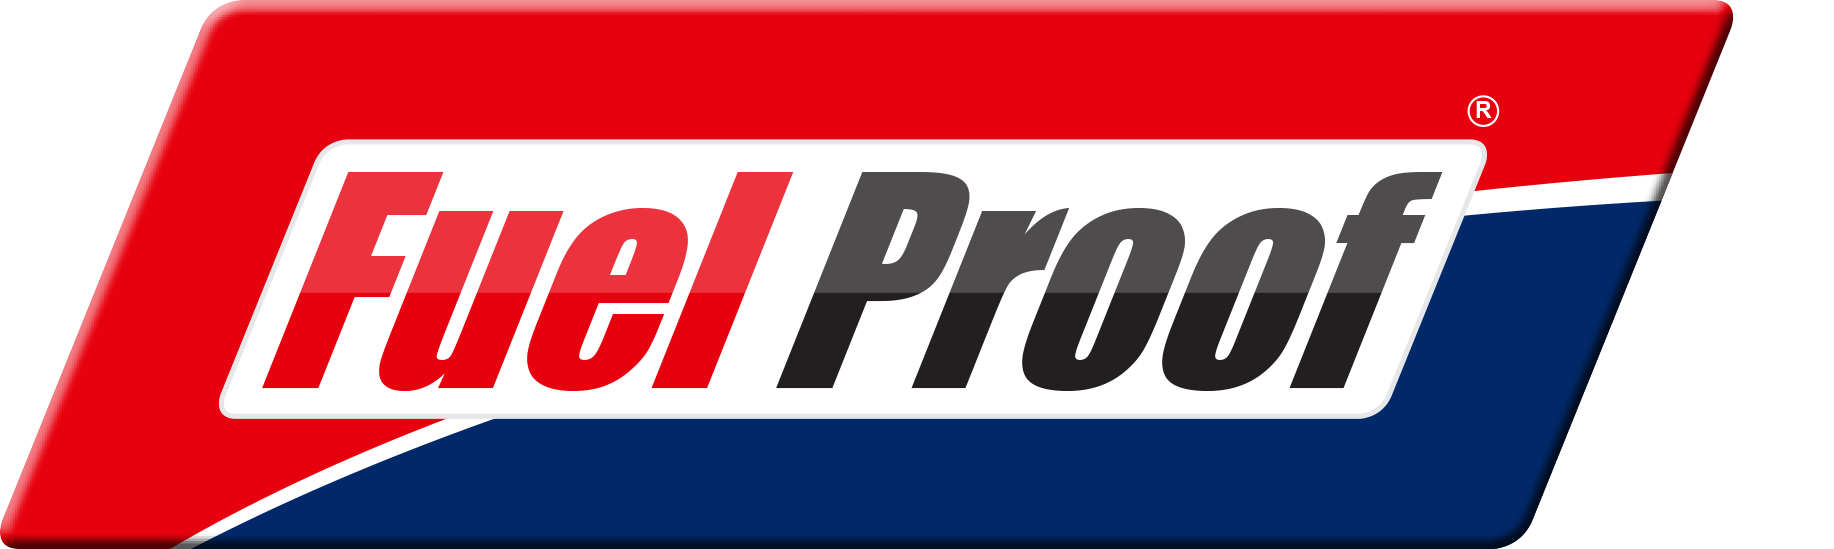 The red, white and blue logo of Fuel Proof USA.